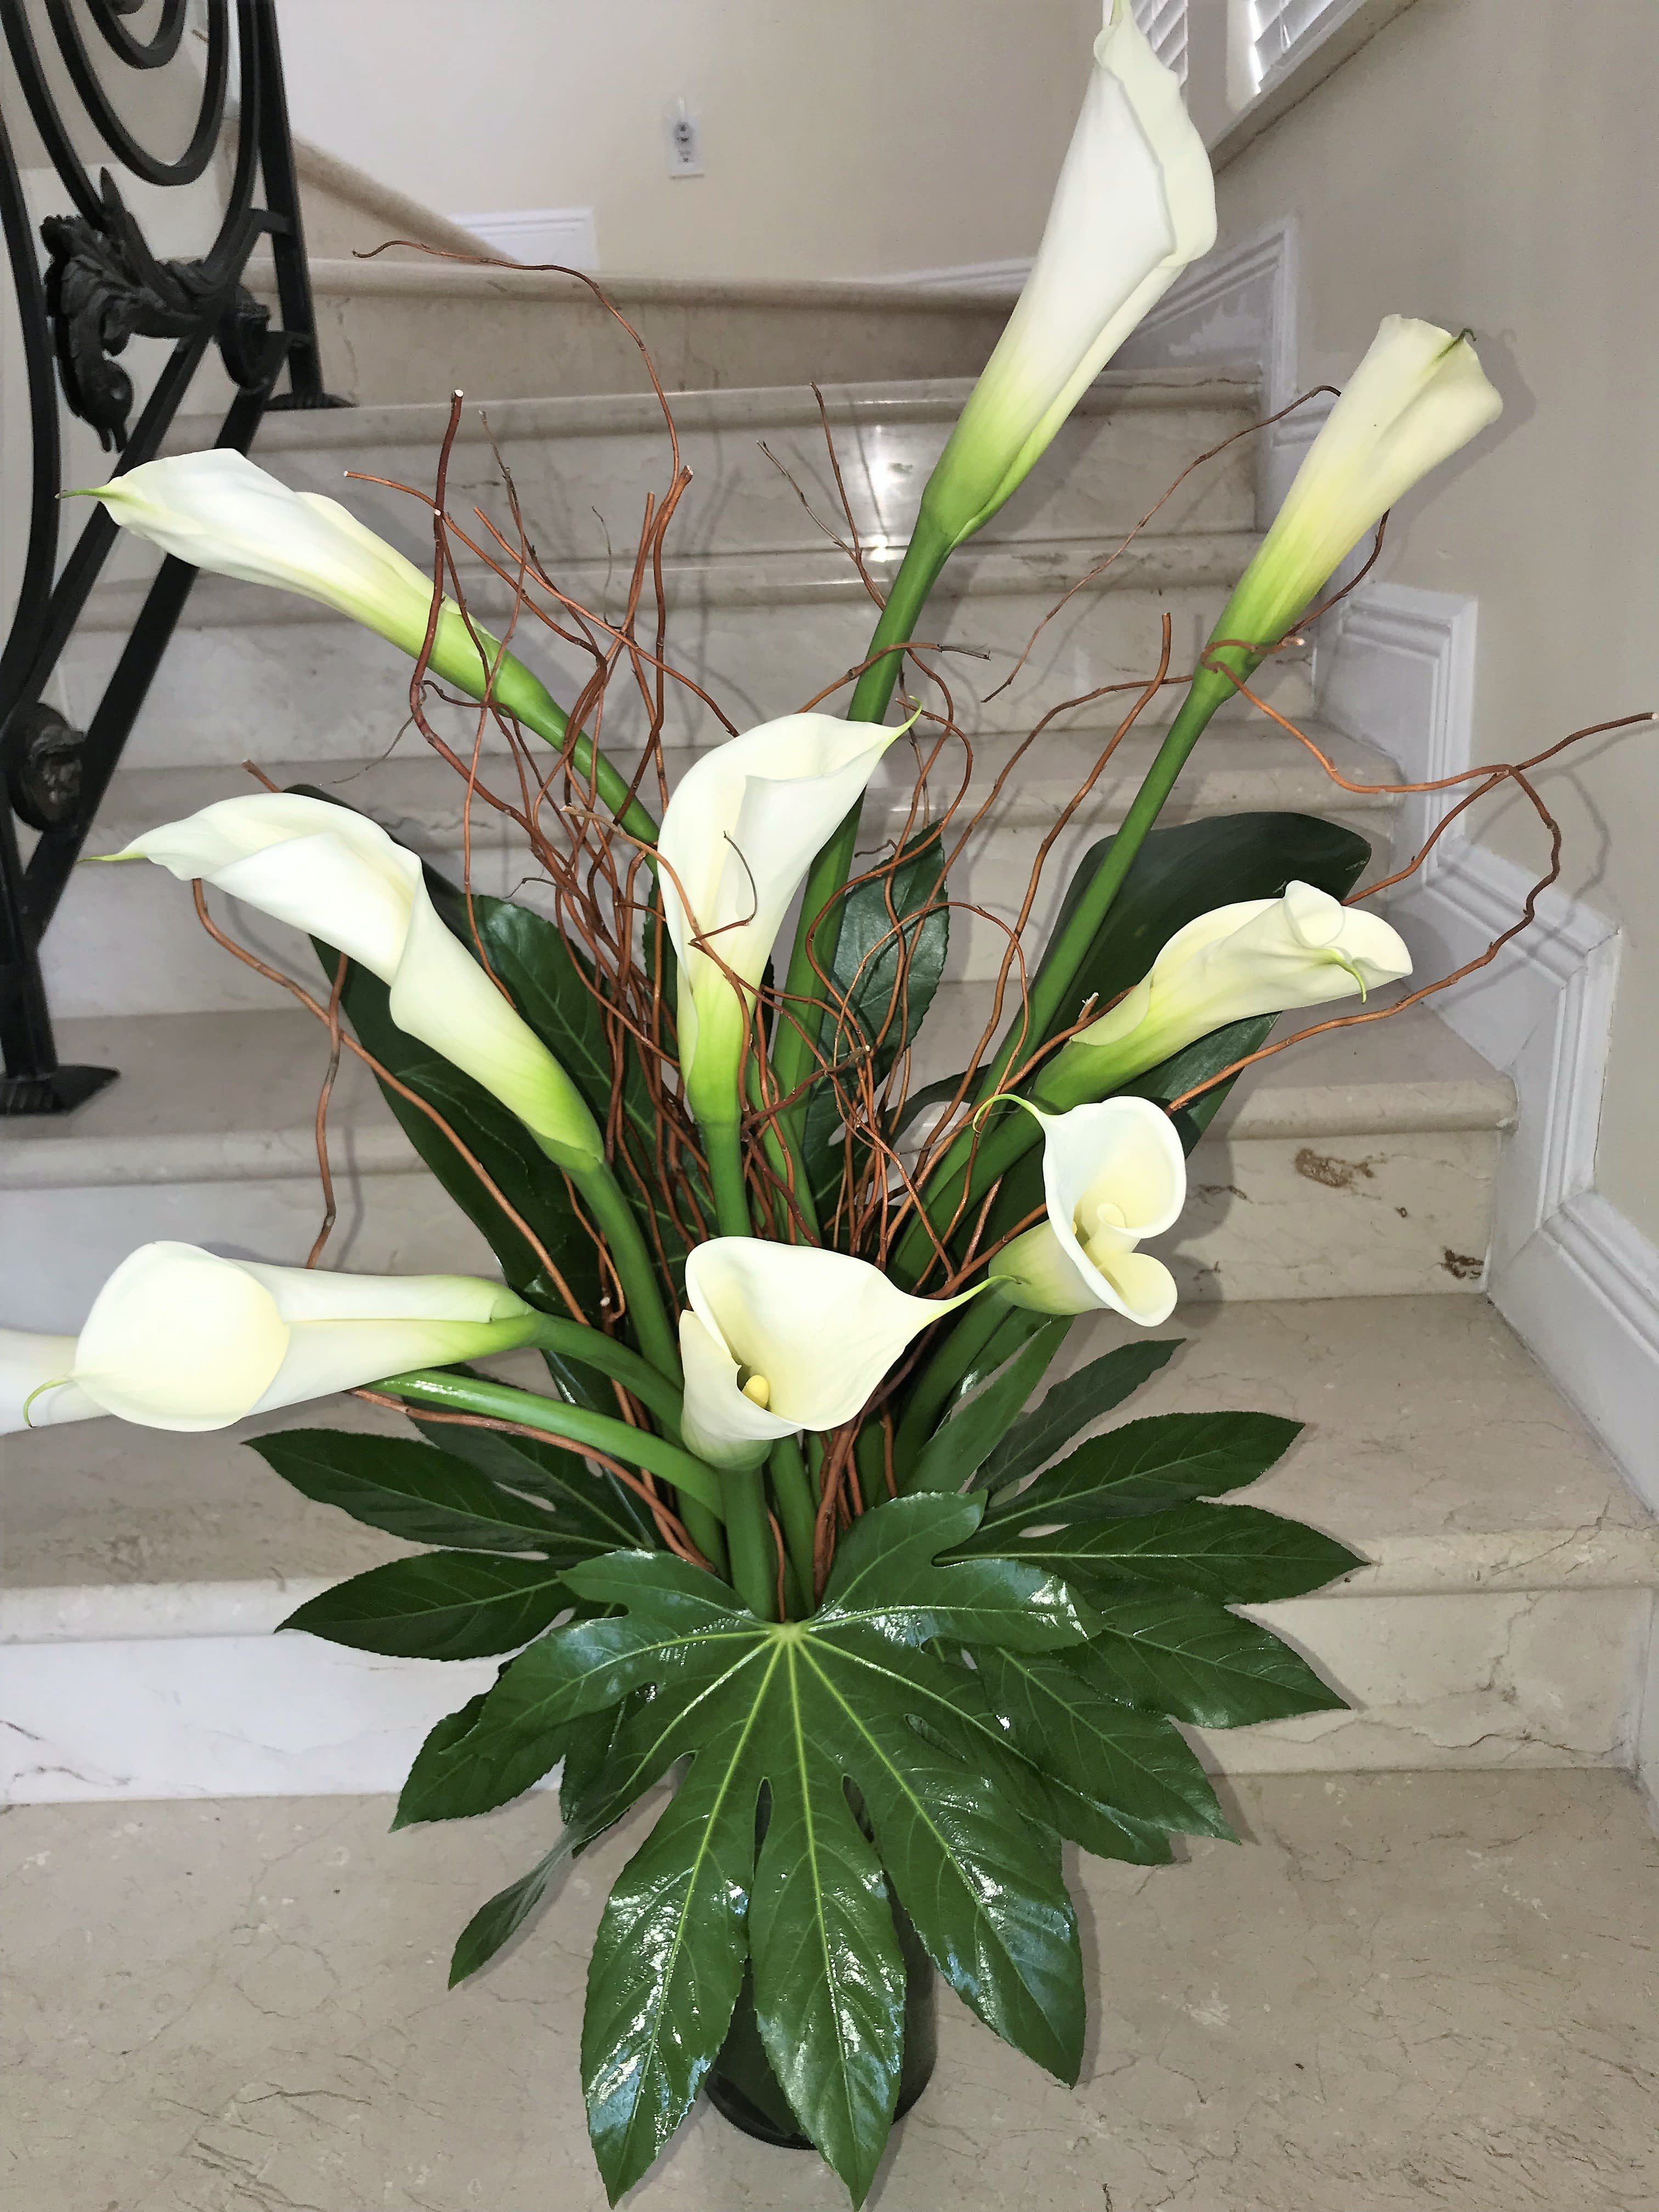 Elegance at its Best with Callas - STANDARD has 10 White Callas, arranged in a vase. DELUXE has 15 Callas arranged in a vase. PREMIUM has 20 Callas and it comes in a bigger vase and more greens.  